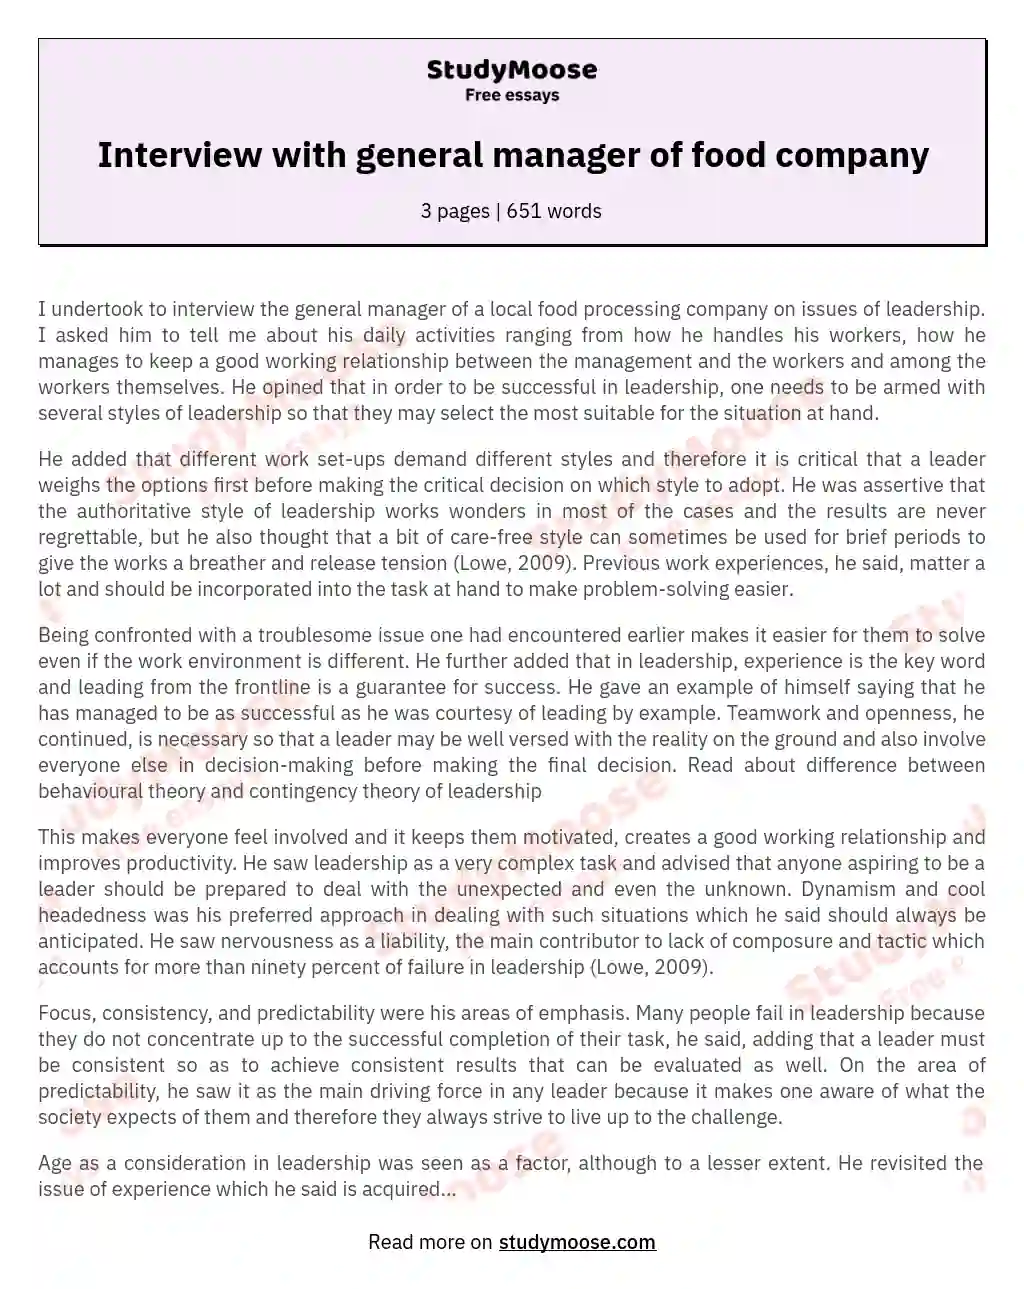 Interview with general manager of food company essay